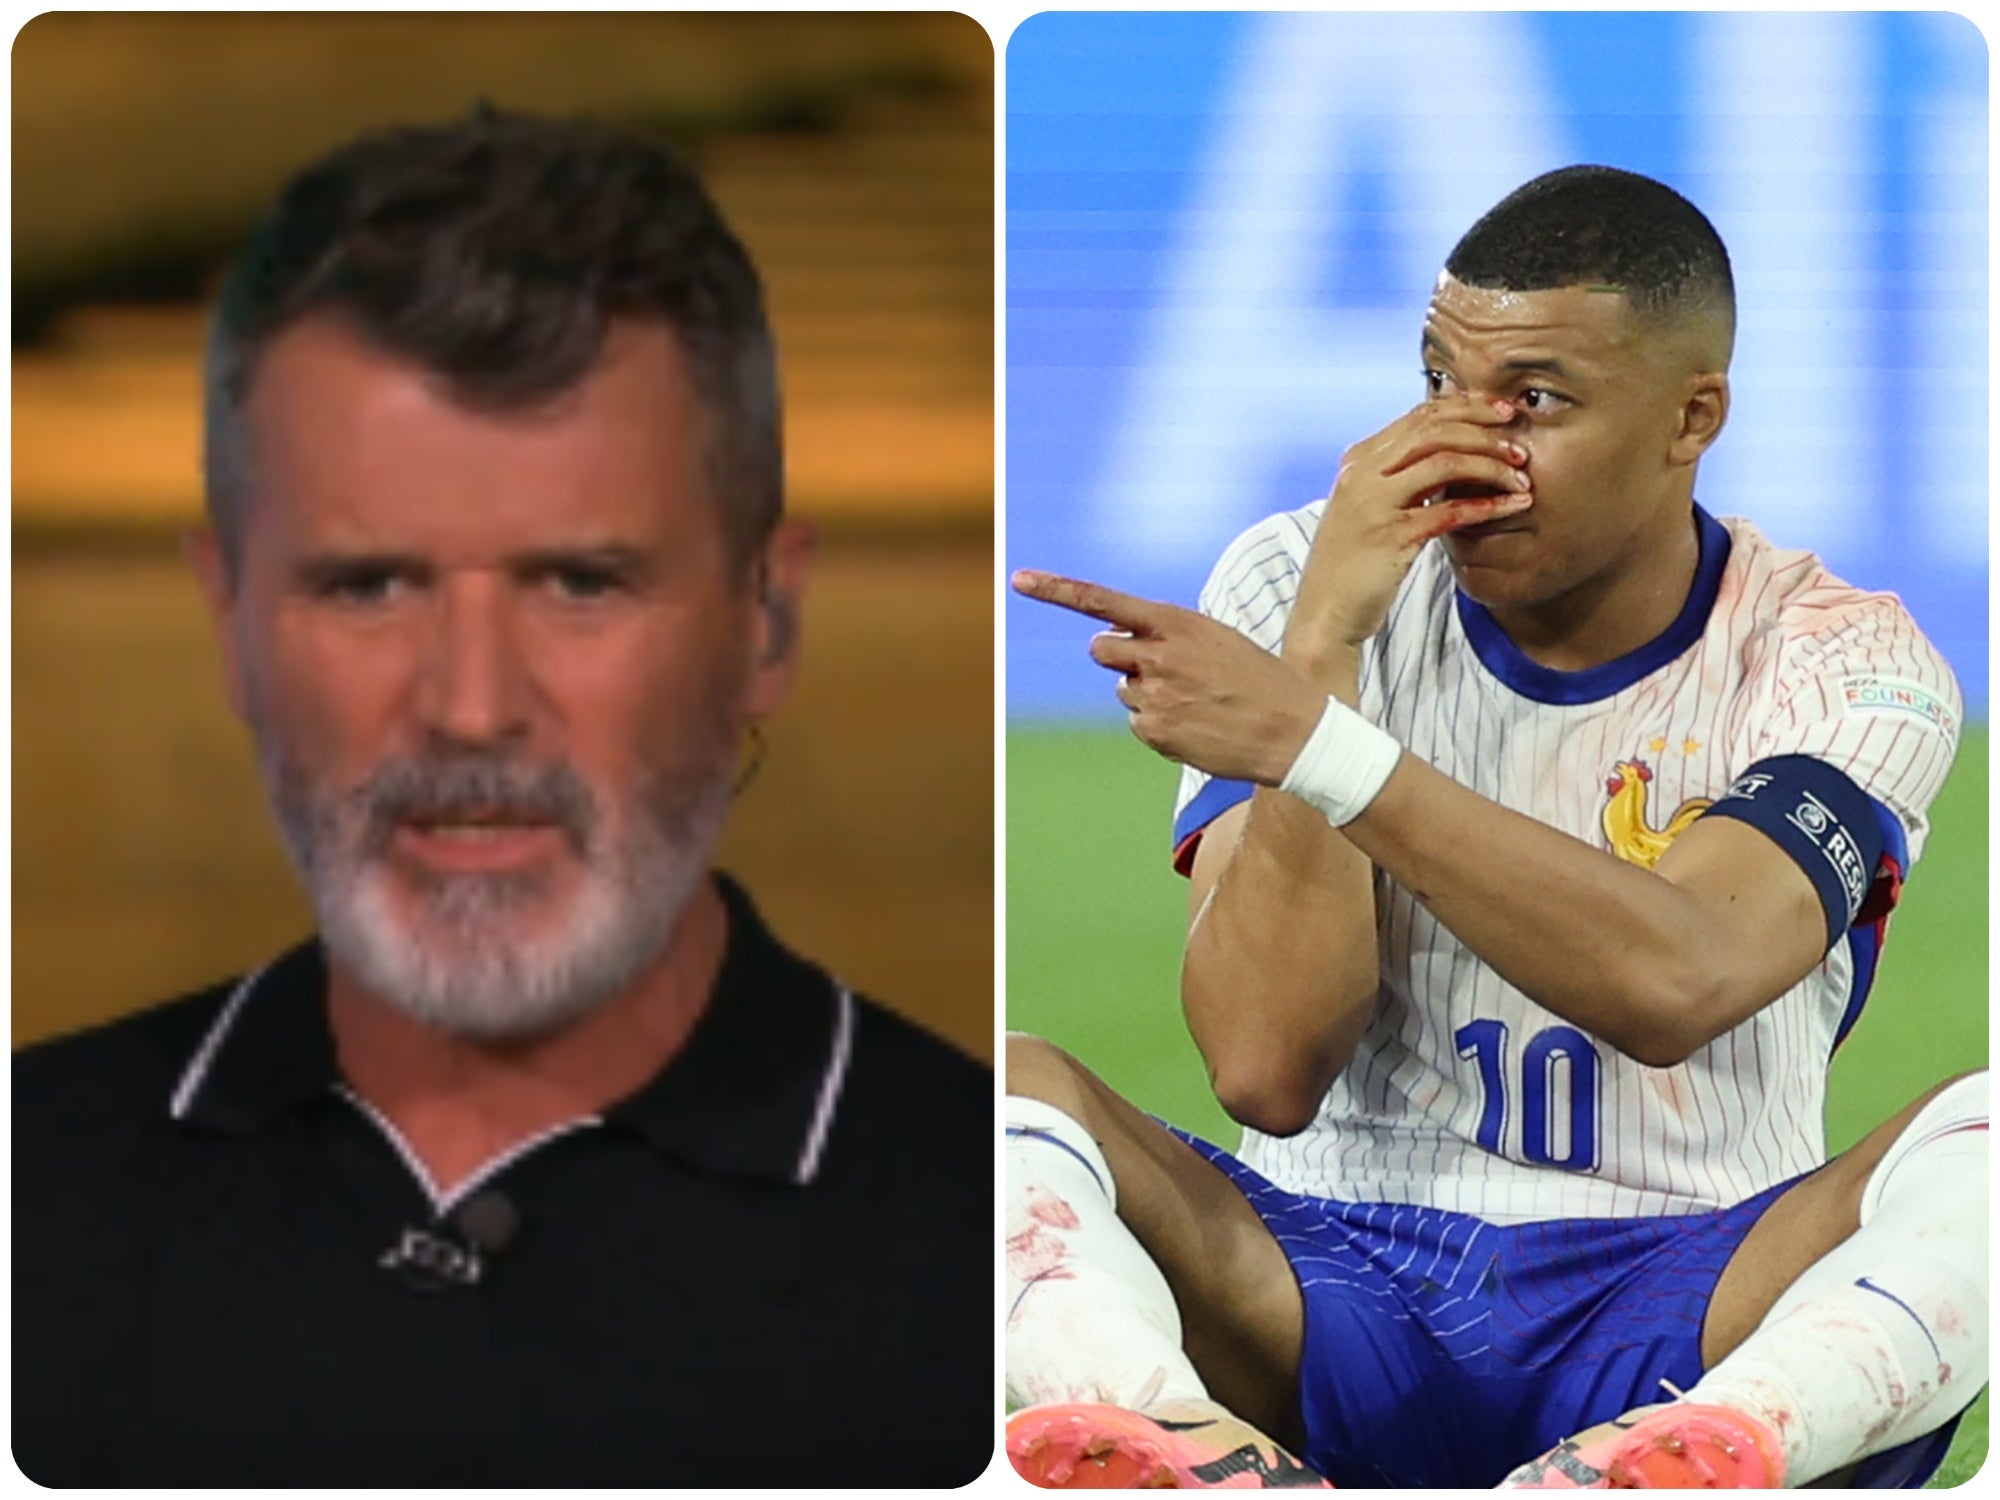 kylian mbappe, roy keane, didier deschamps, france, austria, roy keane blasts kylian mbappe after bloody nose incident: ‘this is out of order’